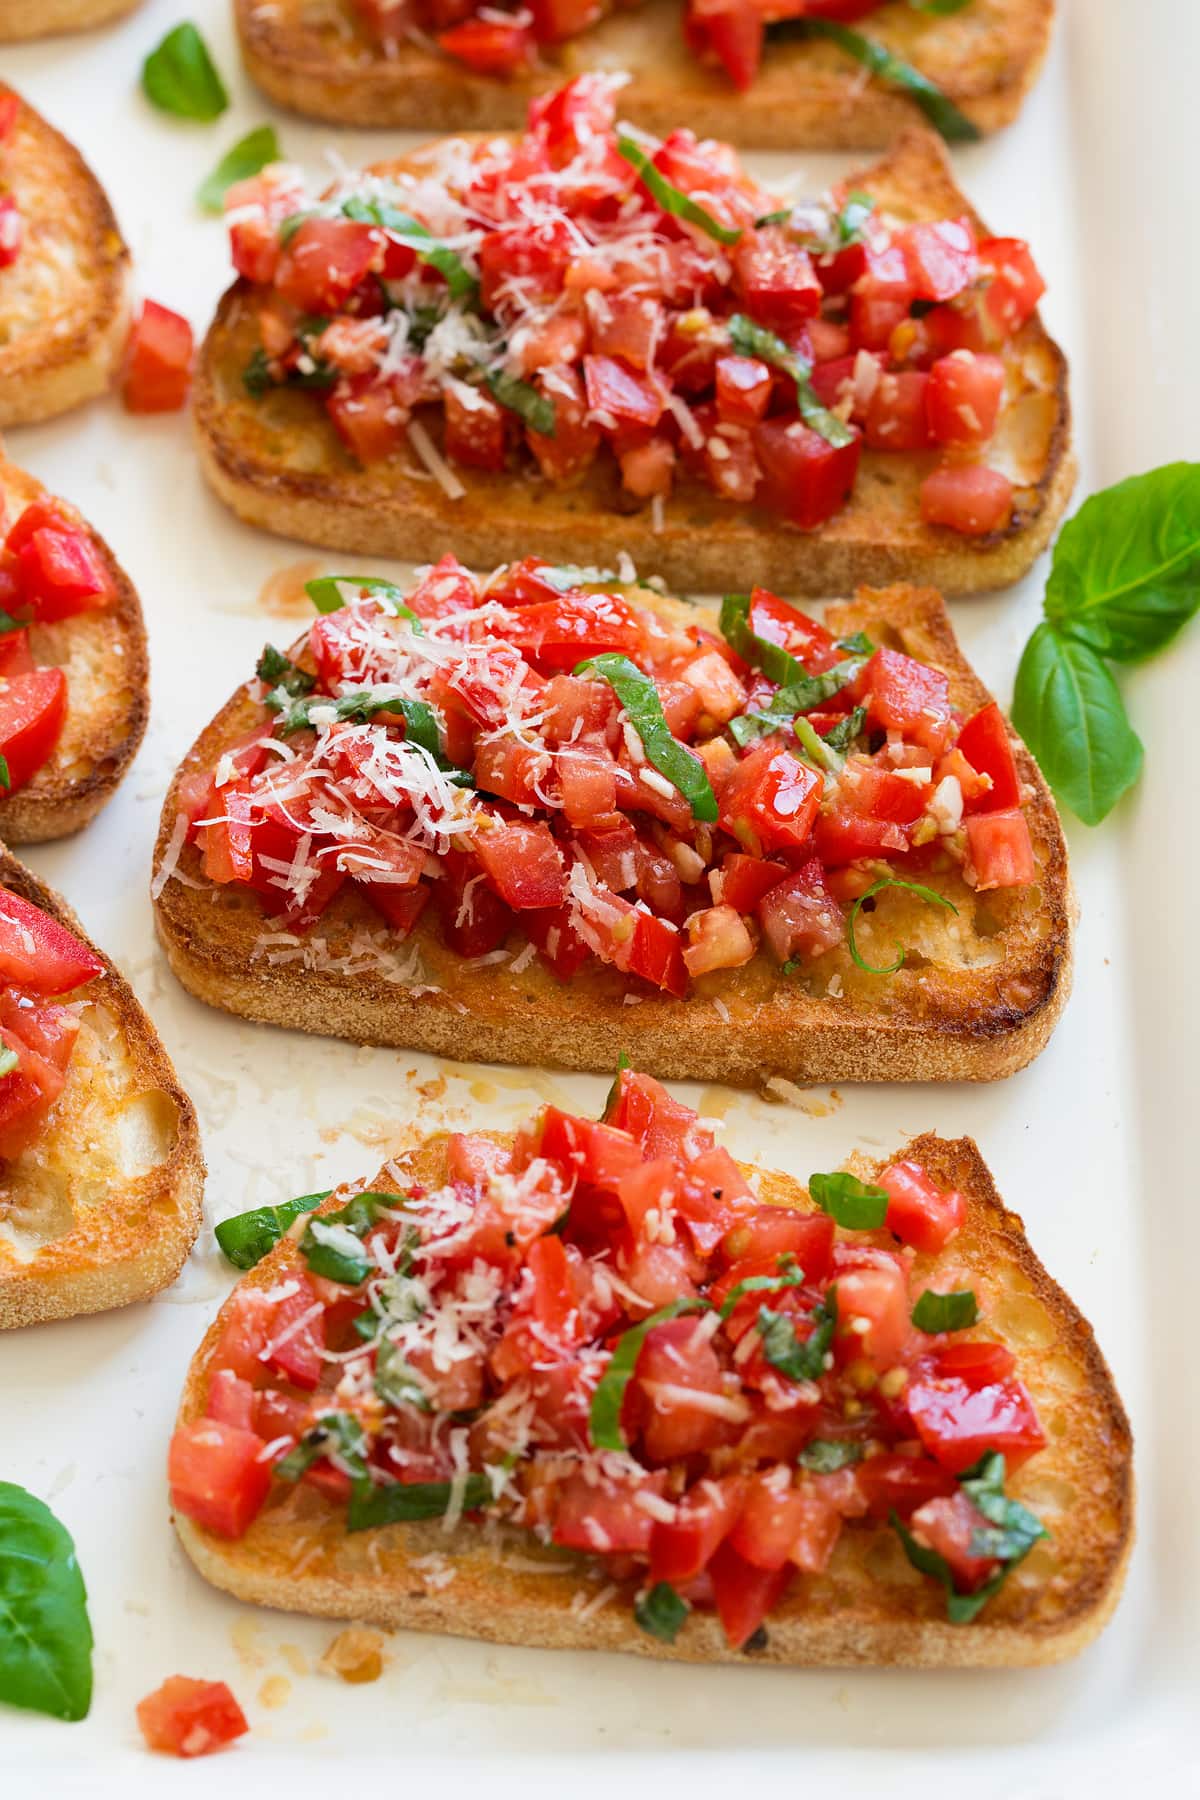 Bruschetta with toasted bread and fresh tomato basil mixture on top, set on a white serving platter.